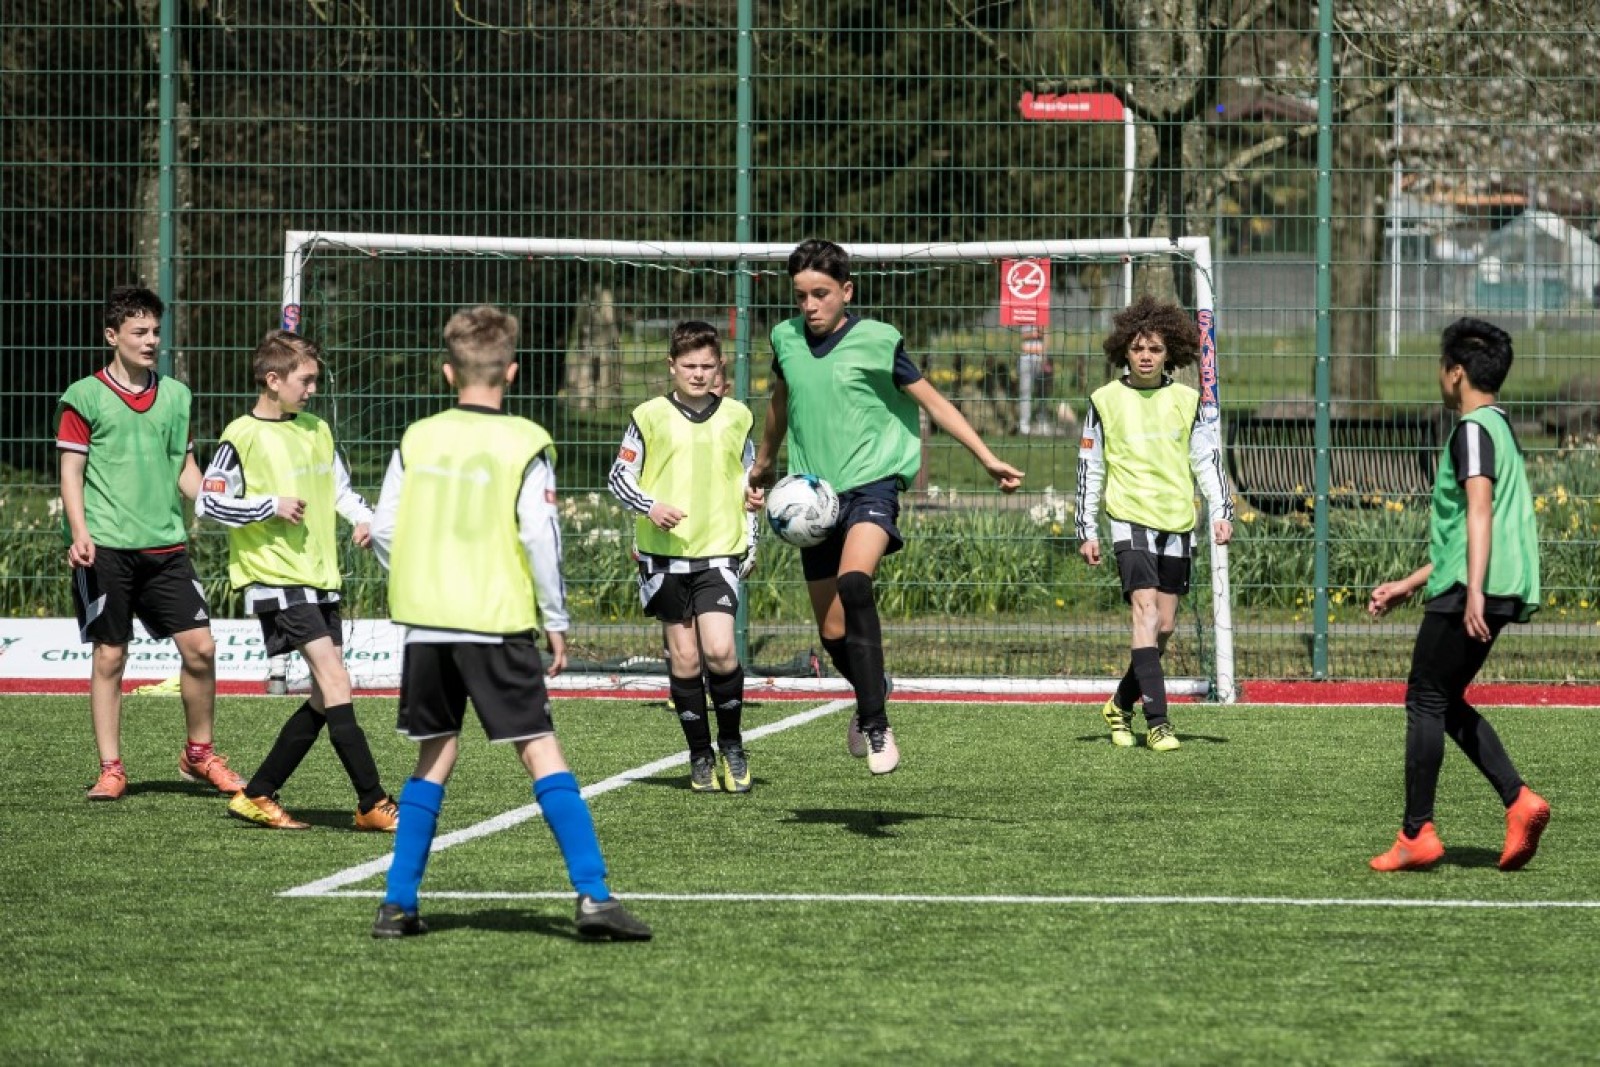 Children playing football on an outdoor pitch.jpg